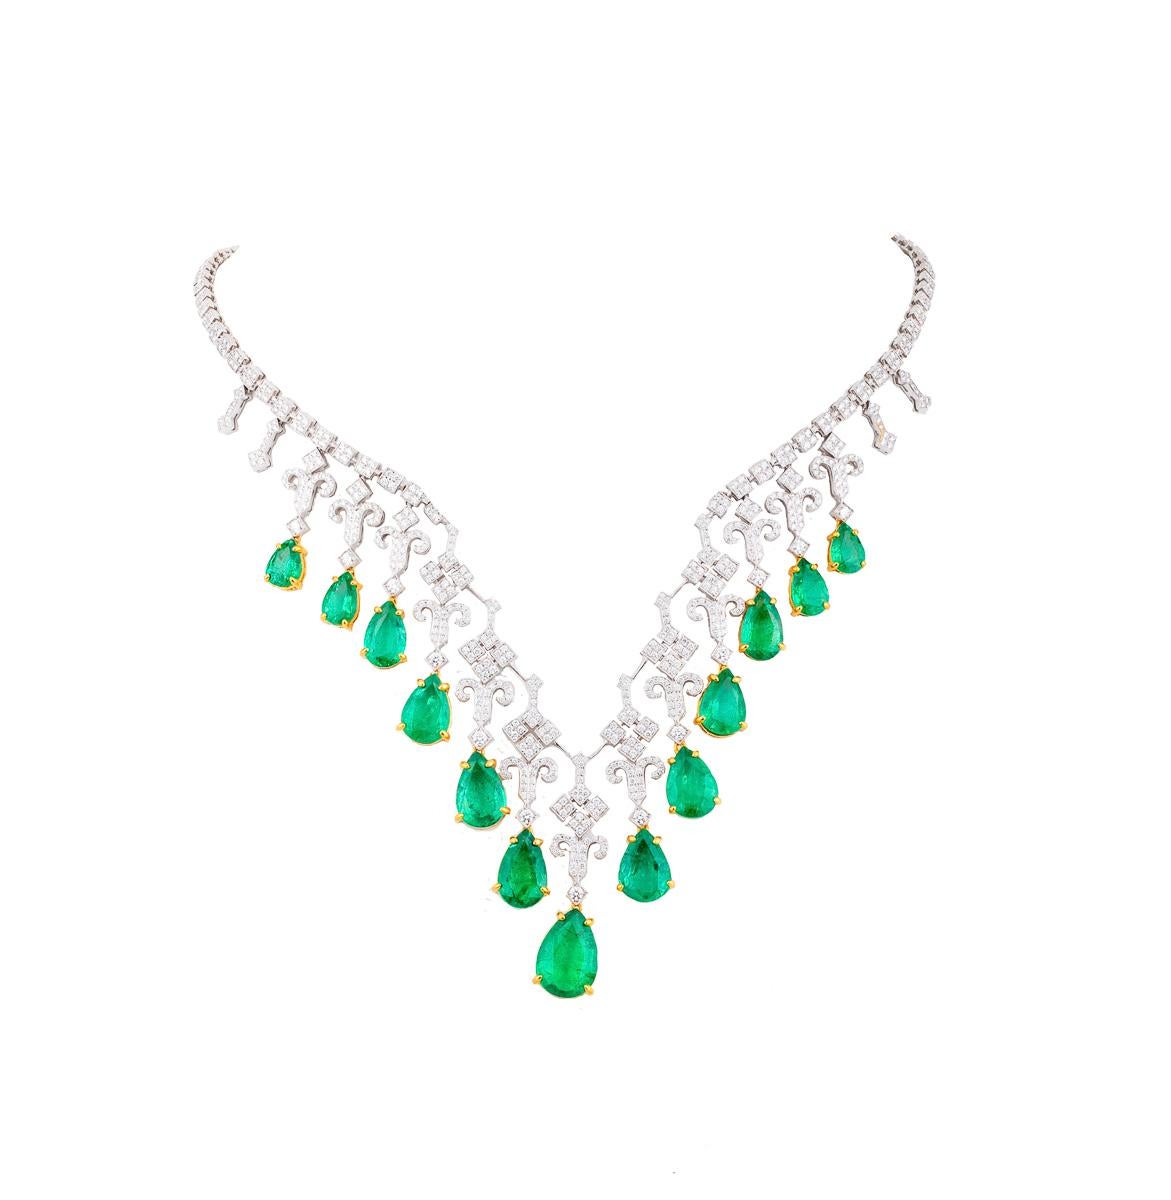 Necklace in 18 k white gold,
Colombian emeralds in 18 k yellow gold
32,24 ct emerald drops
5.40 ct diamonds W/vsi-si
Length 46 cm and an extension for insertion of 4.5 cm
Weight 58,8 Gramm